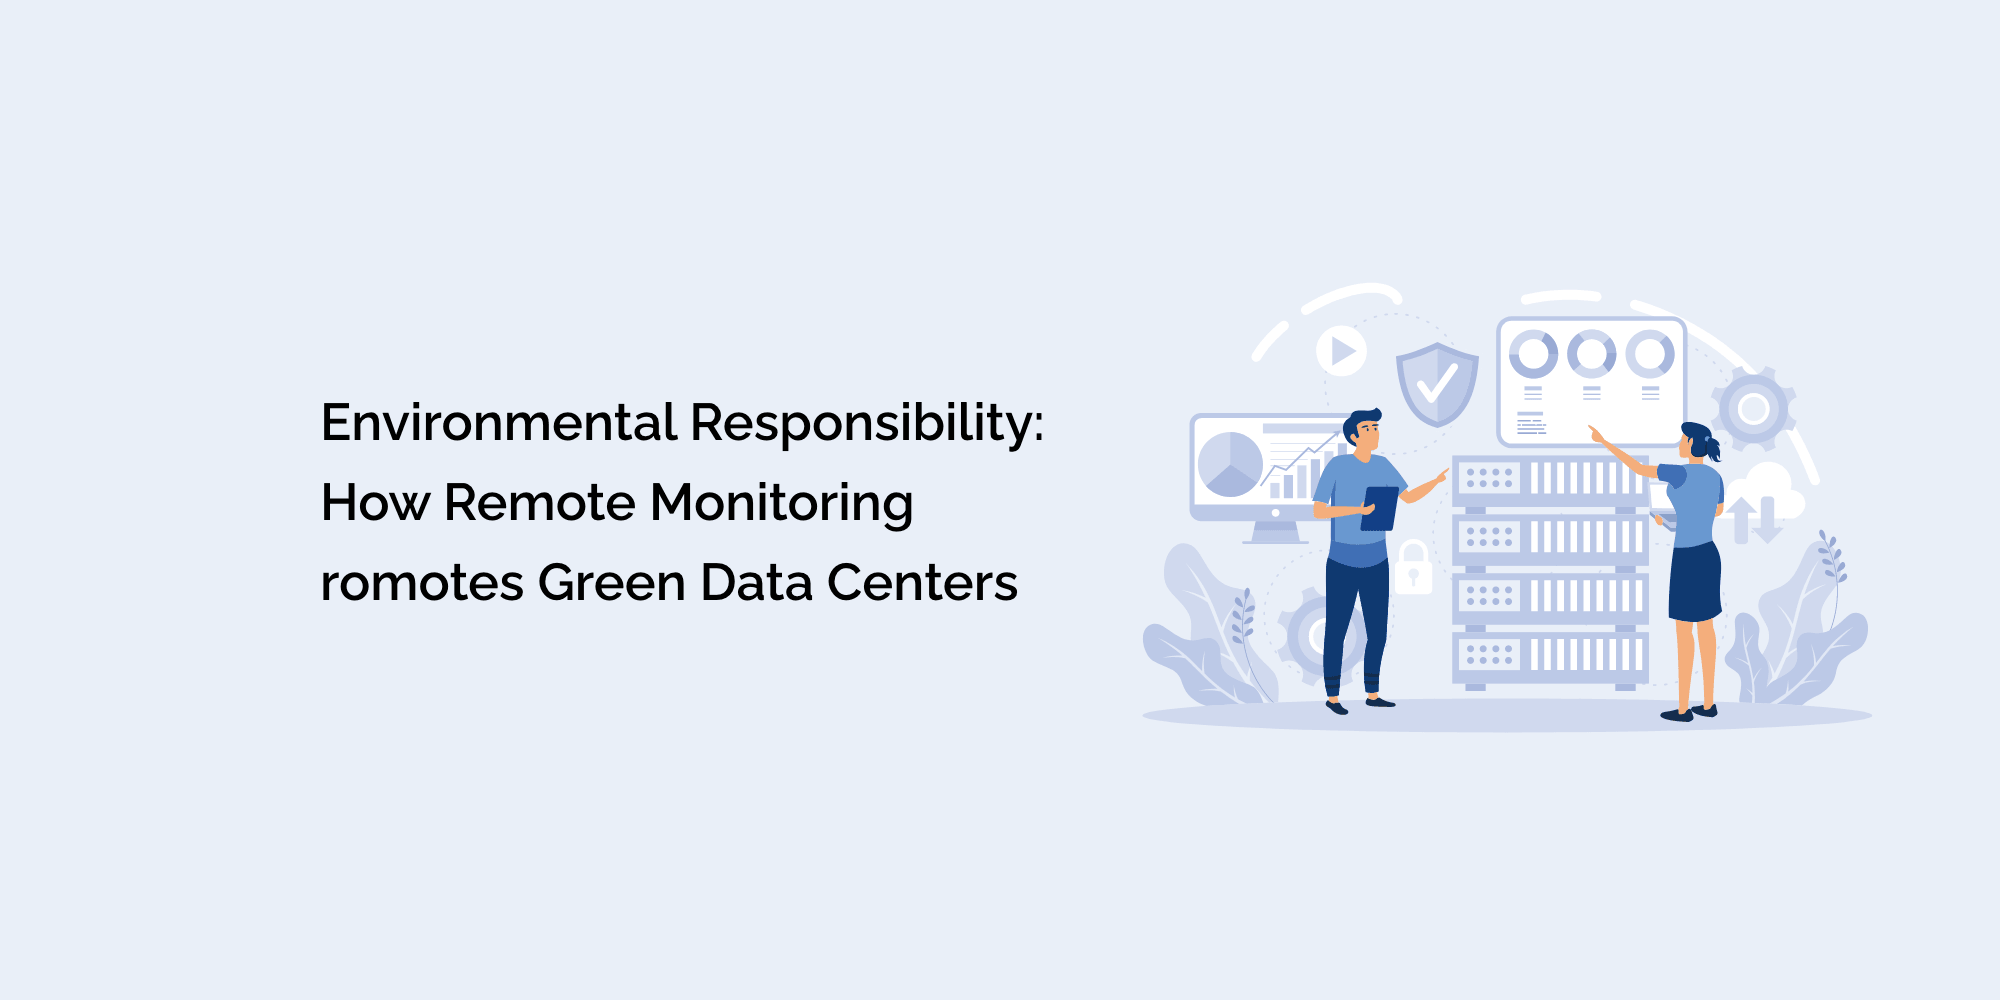 Environmental Responsibility: How Remote Monitoring Promotes Green Data Centers